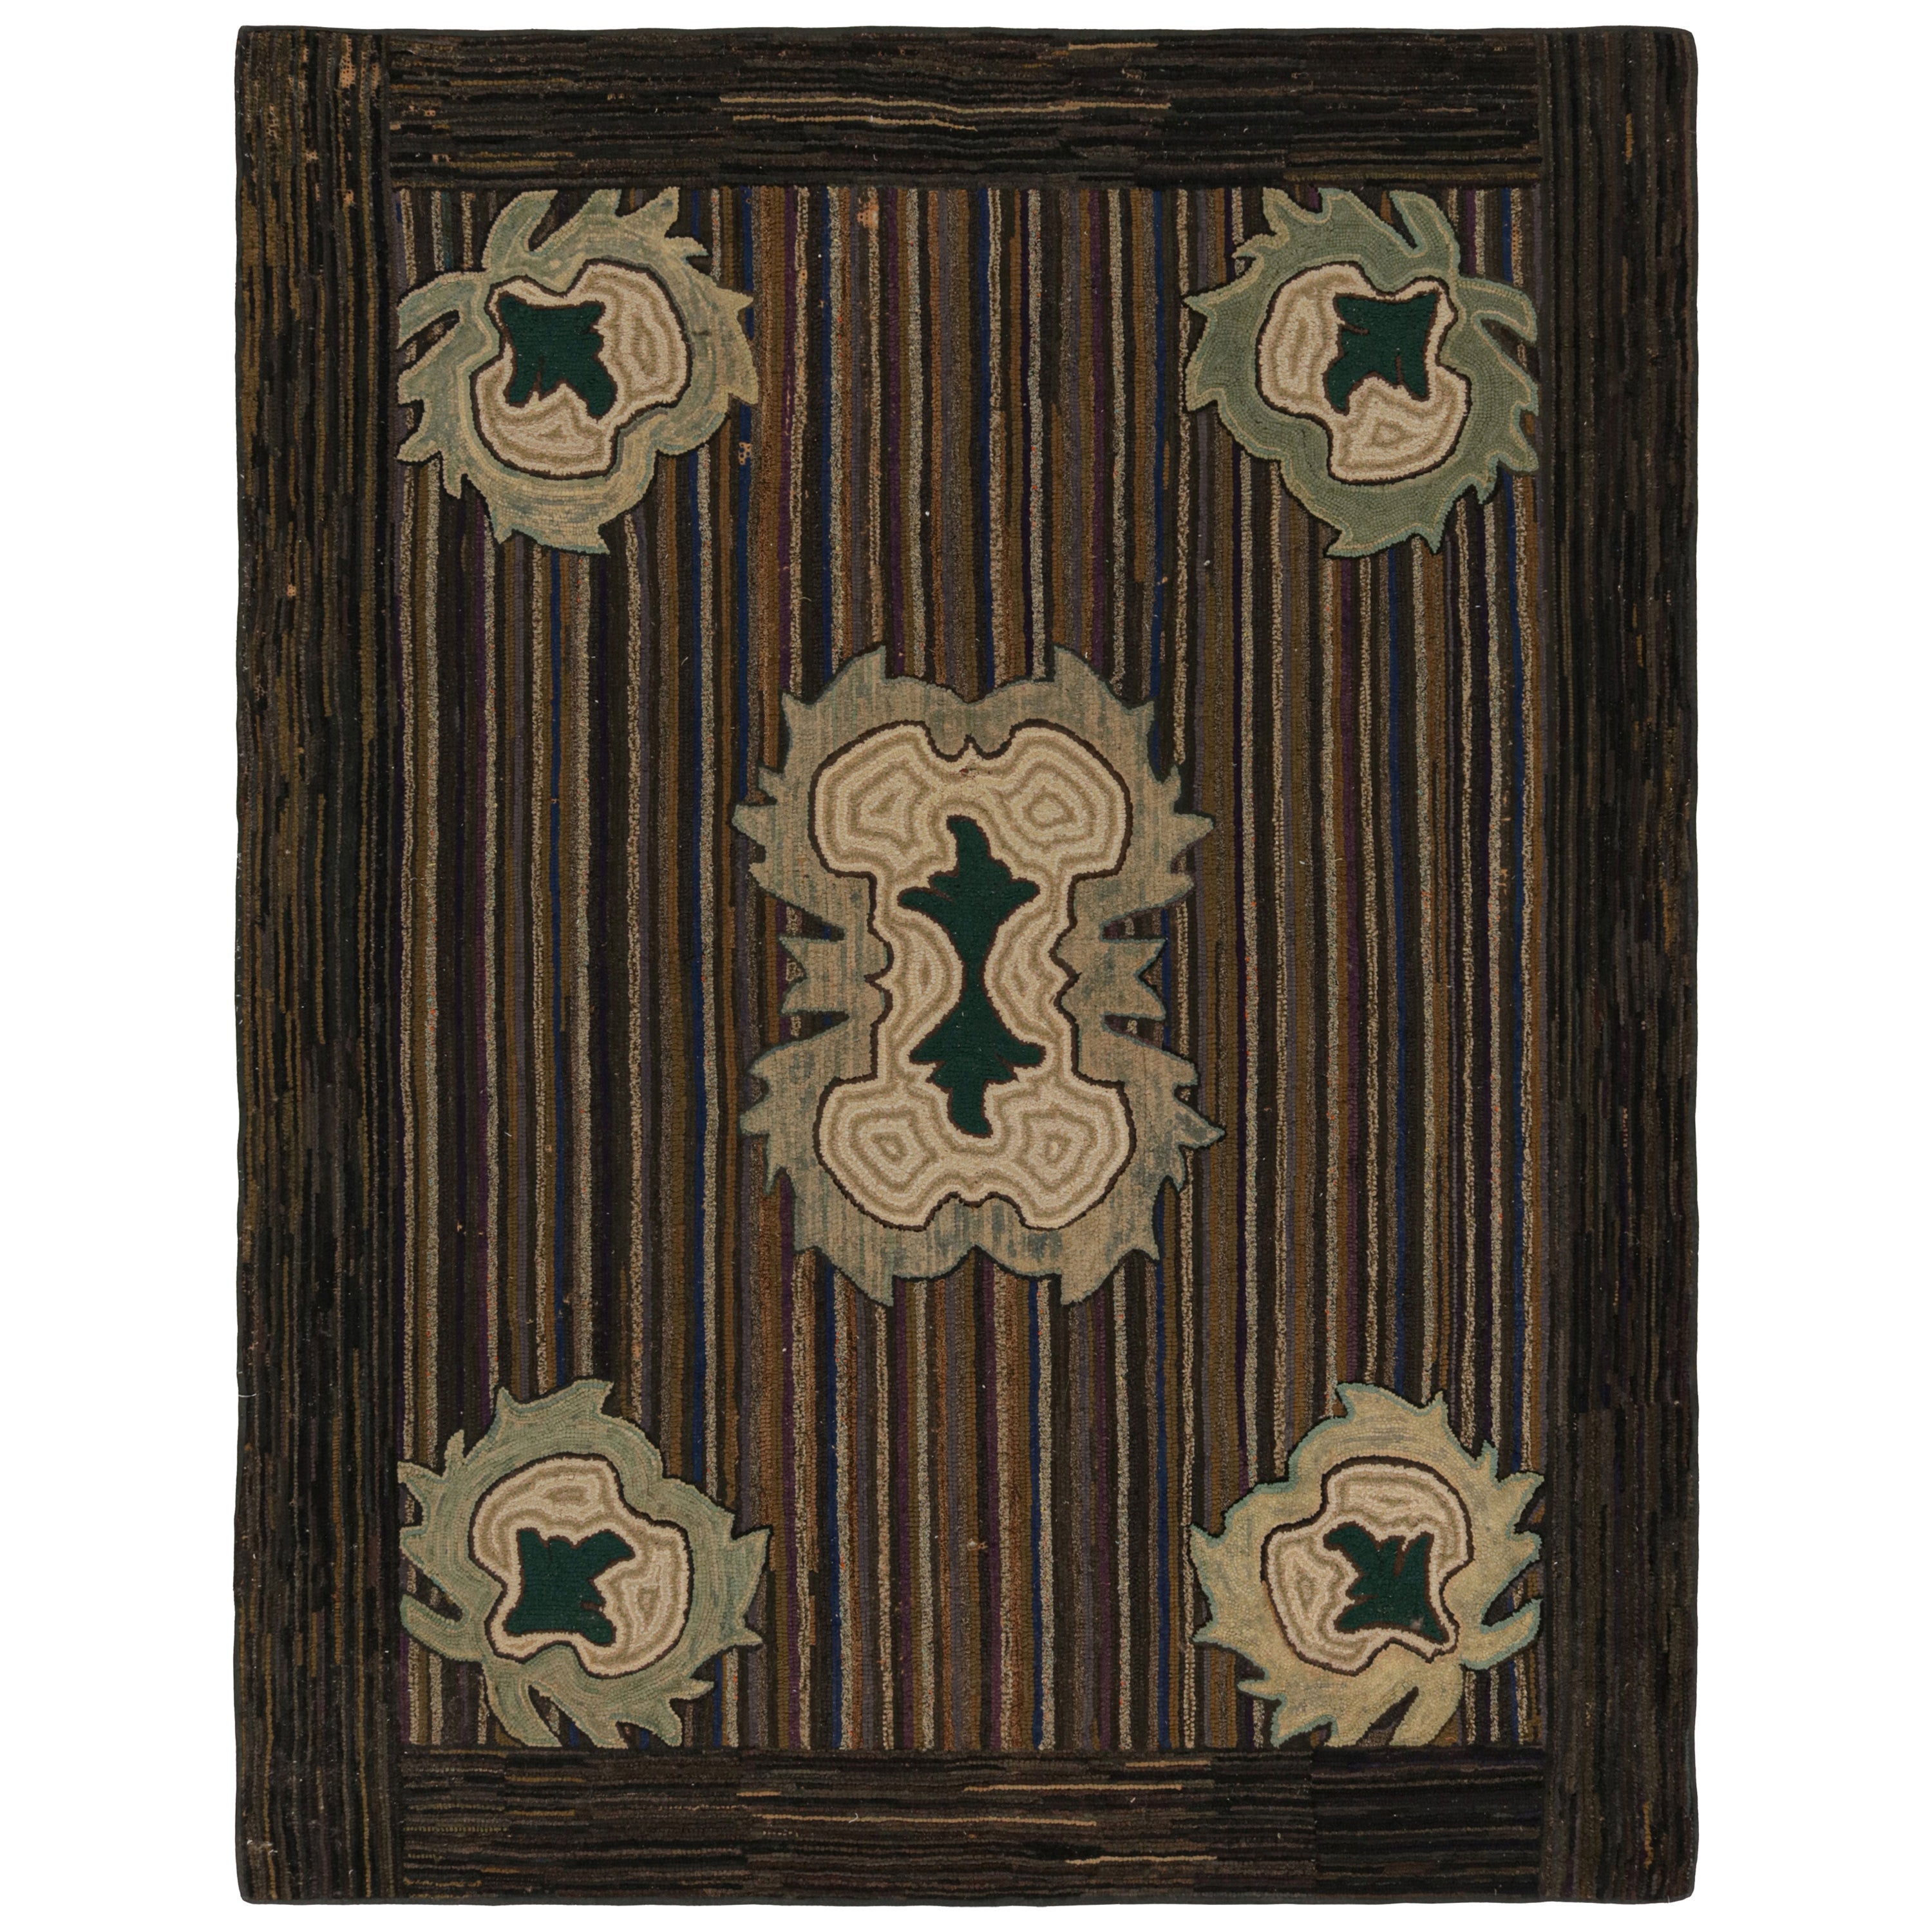 Antique Hooked Rug with Polychromatic Stripes and Medallions, from Rug & Kilim For Sale